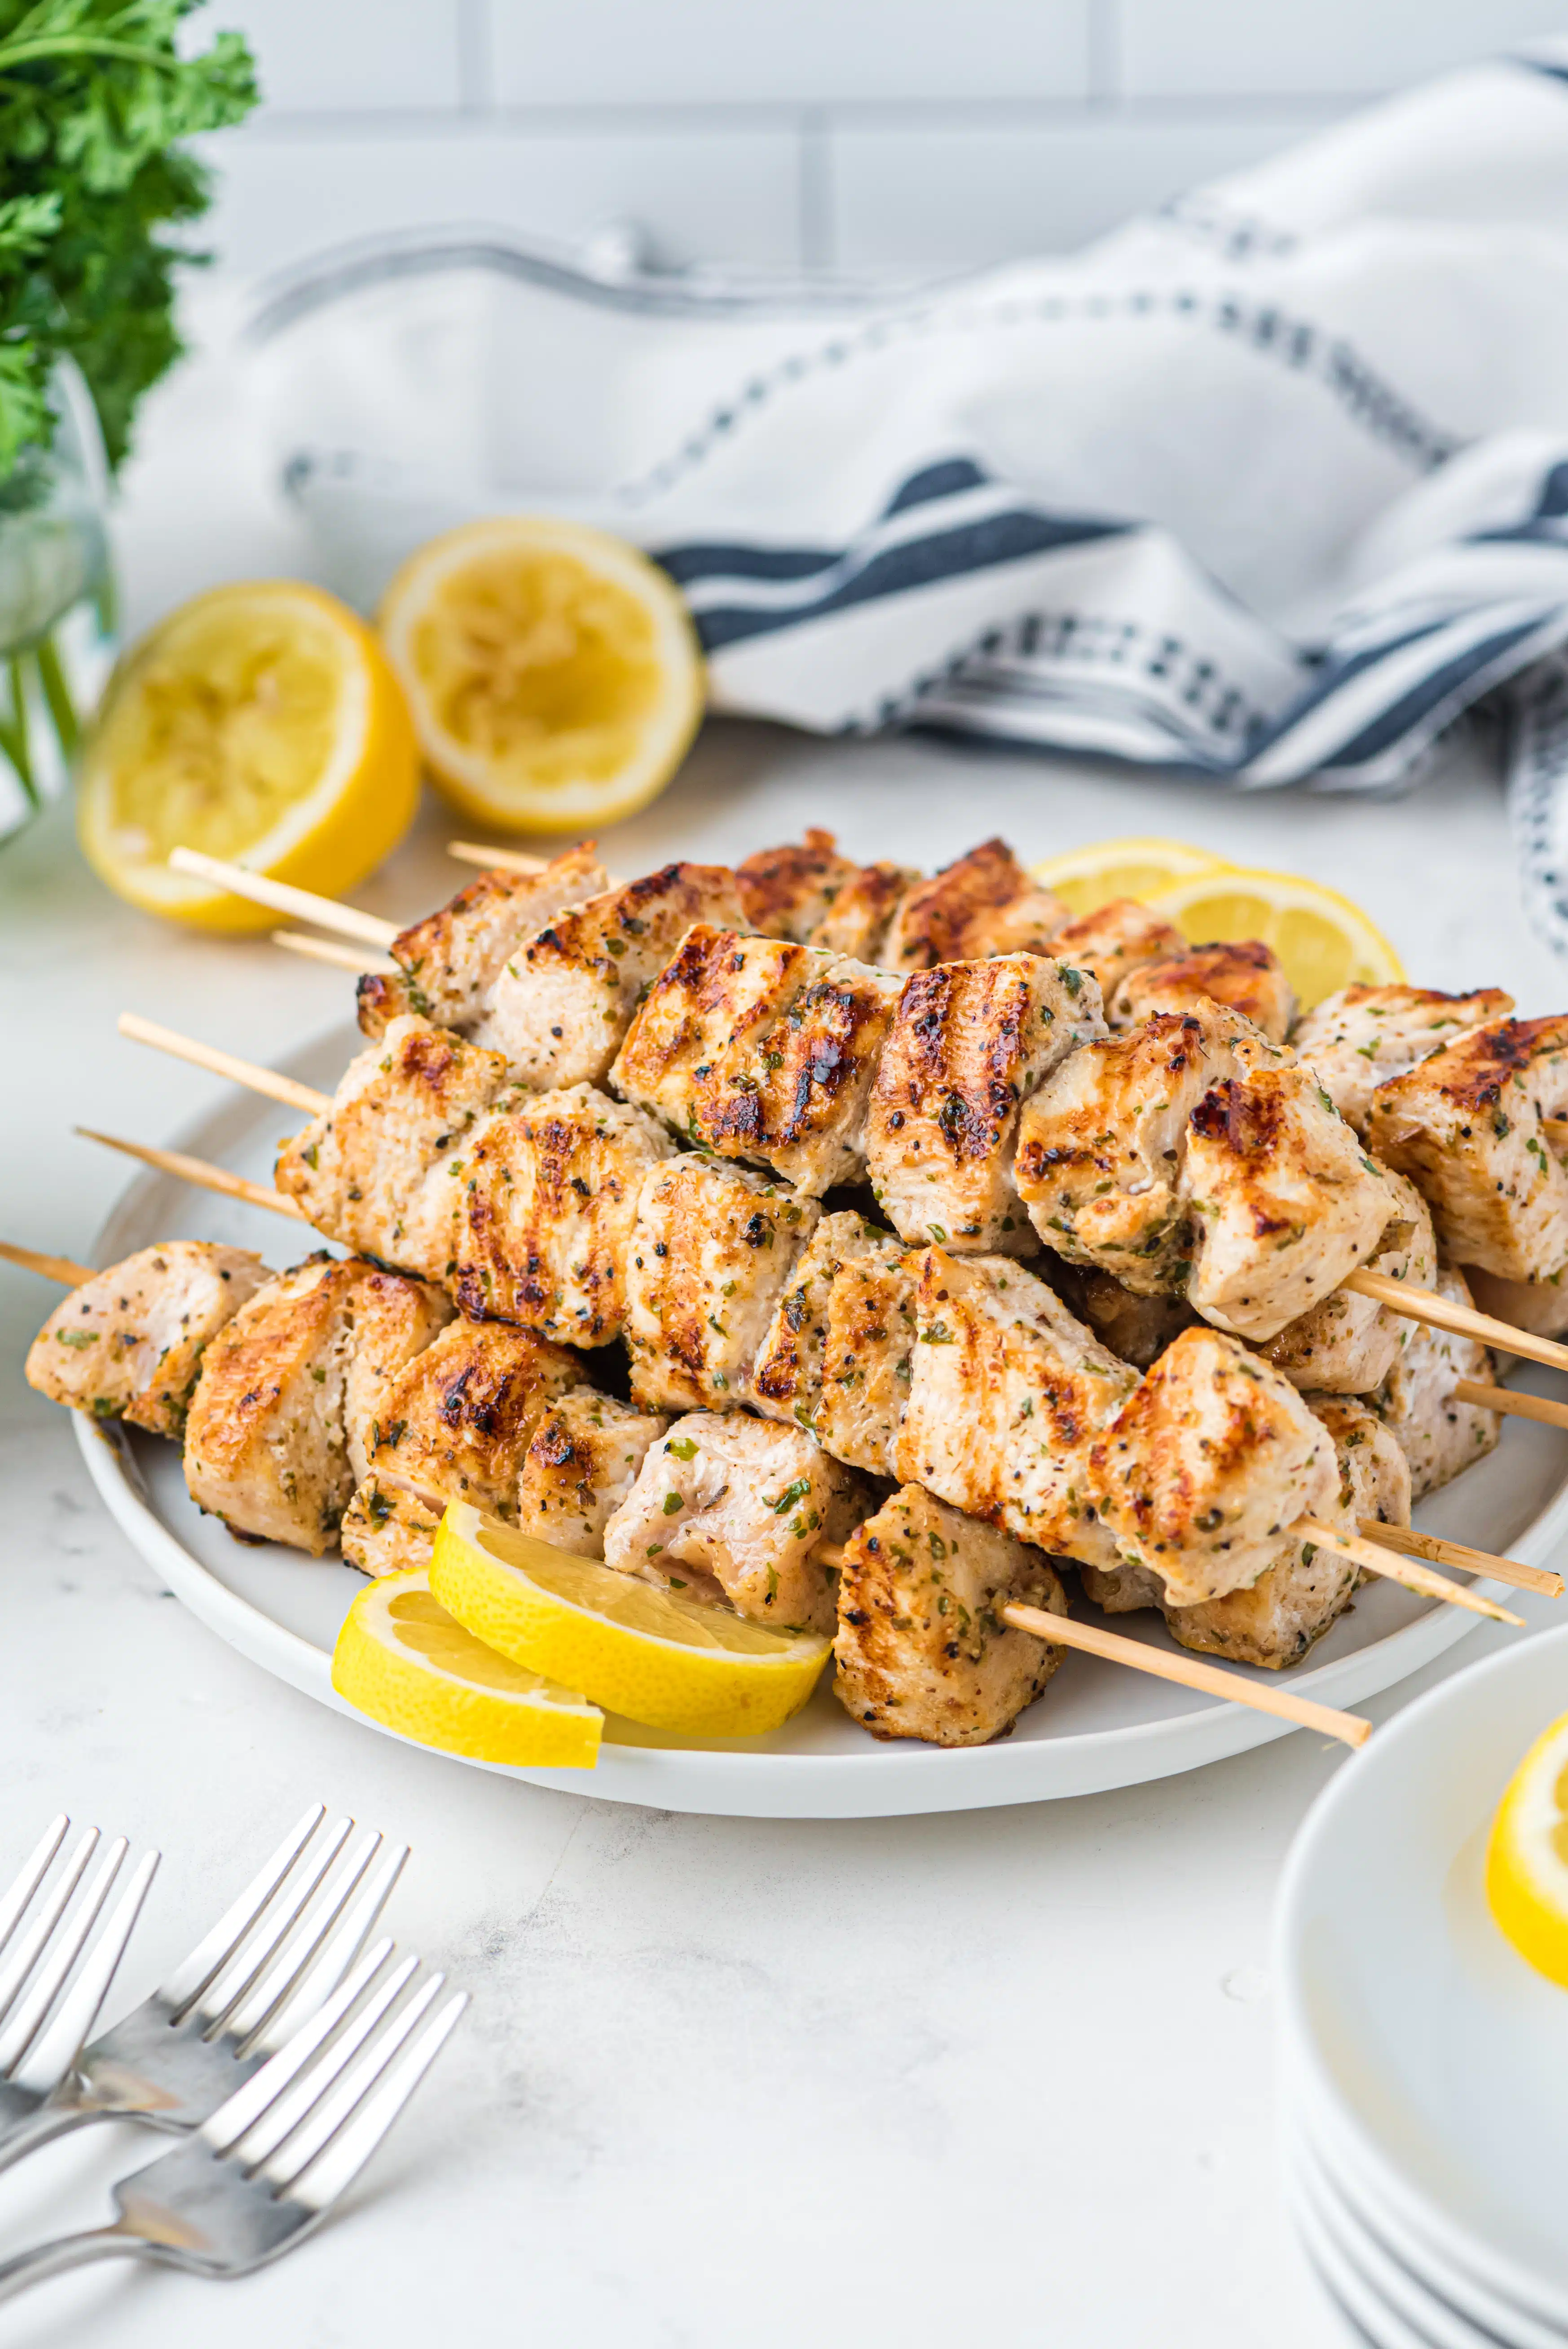 Pile of chicken skewers on a white plate with lemon slices and wedges for garnish.